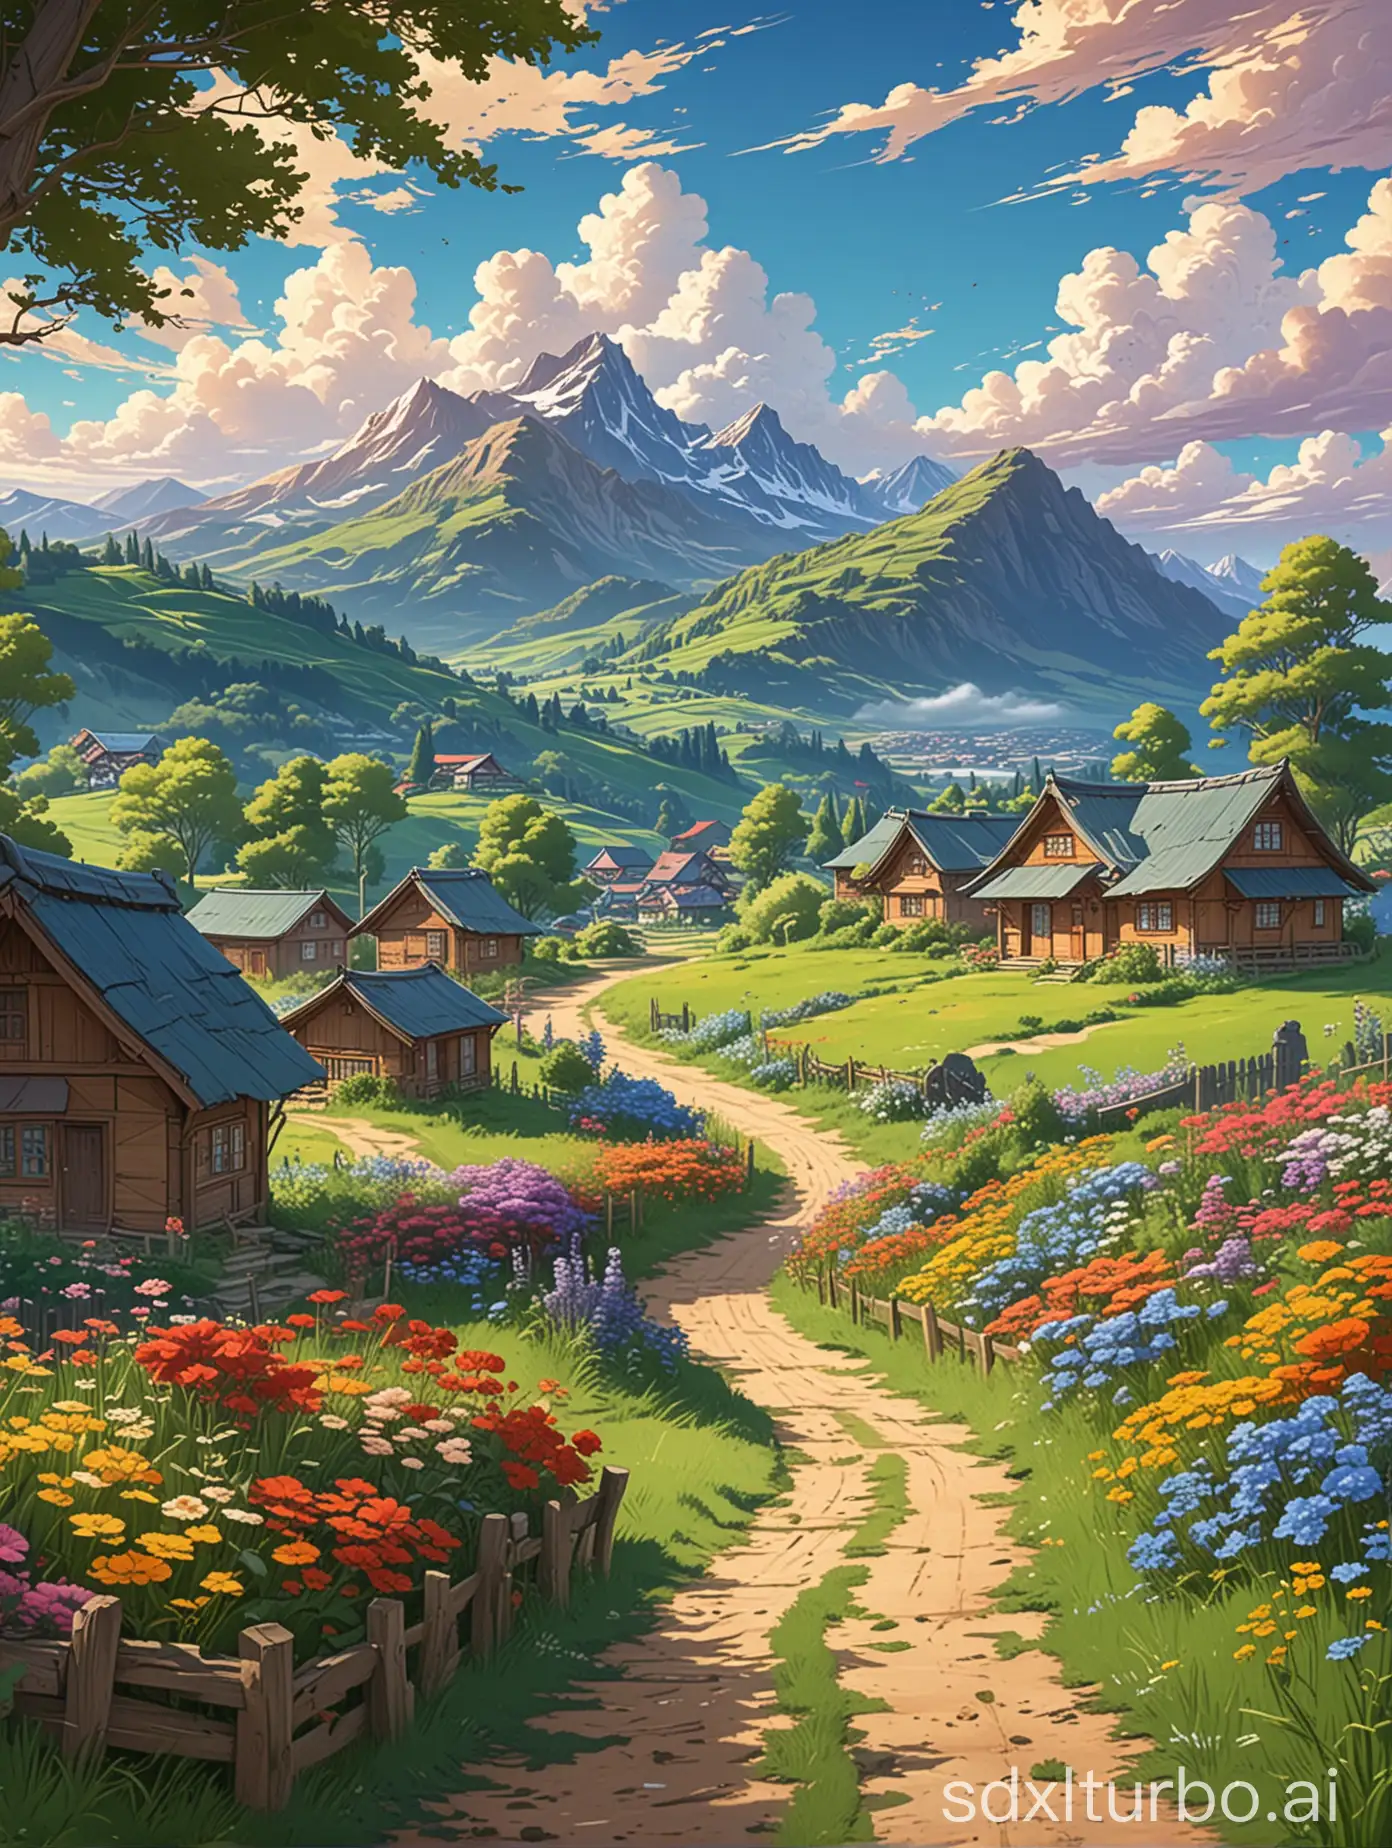 Anime-style illustration of a vibrant countryside landscape. The foreground shows a grassy dirt path lined with colorful flowers leading to wooden houses with pointed roofs. Background features green, tree-covered hills and towering mountains under a bright blue sky filled with large, circle clouds.